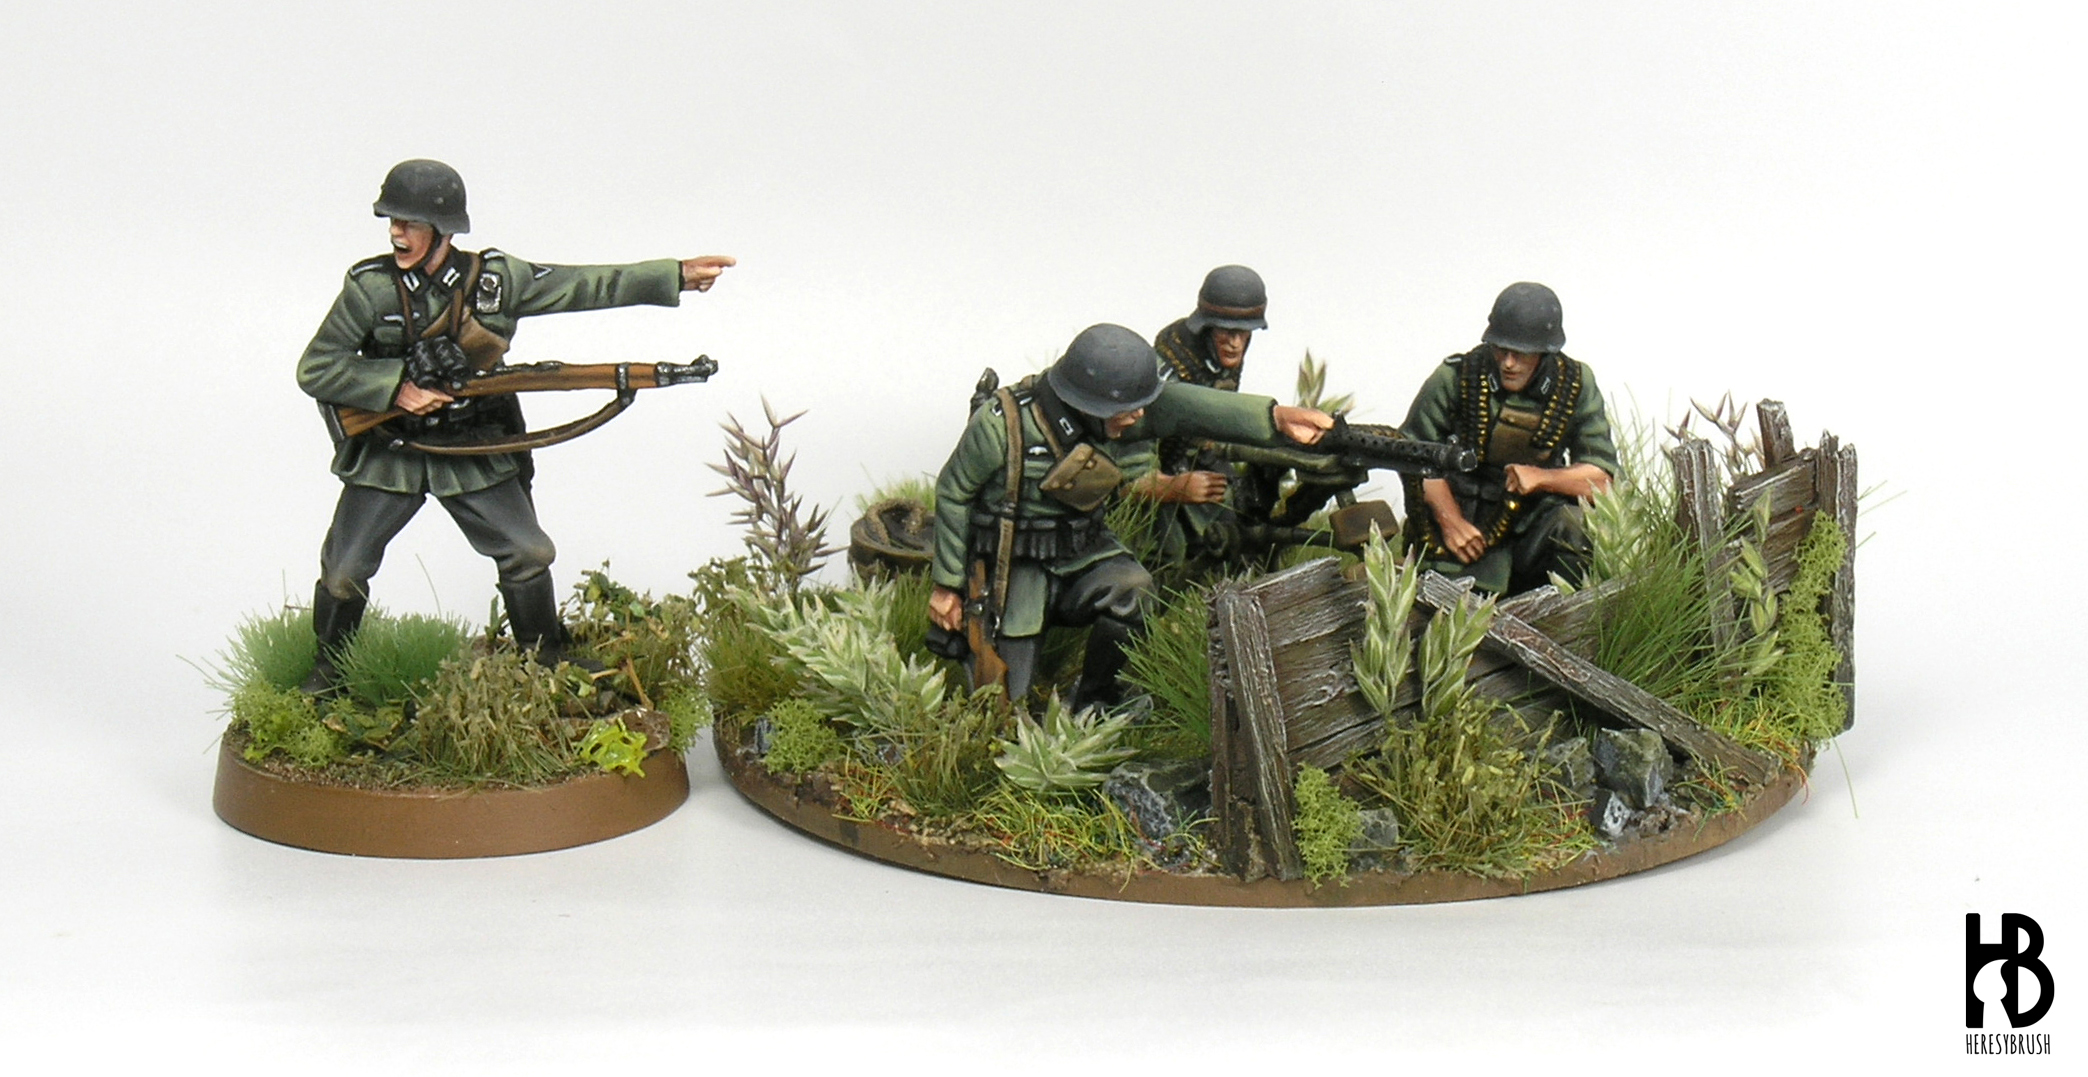 How to decorate bases with plants – HeresyBrush